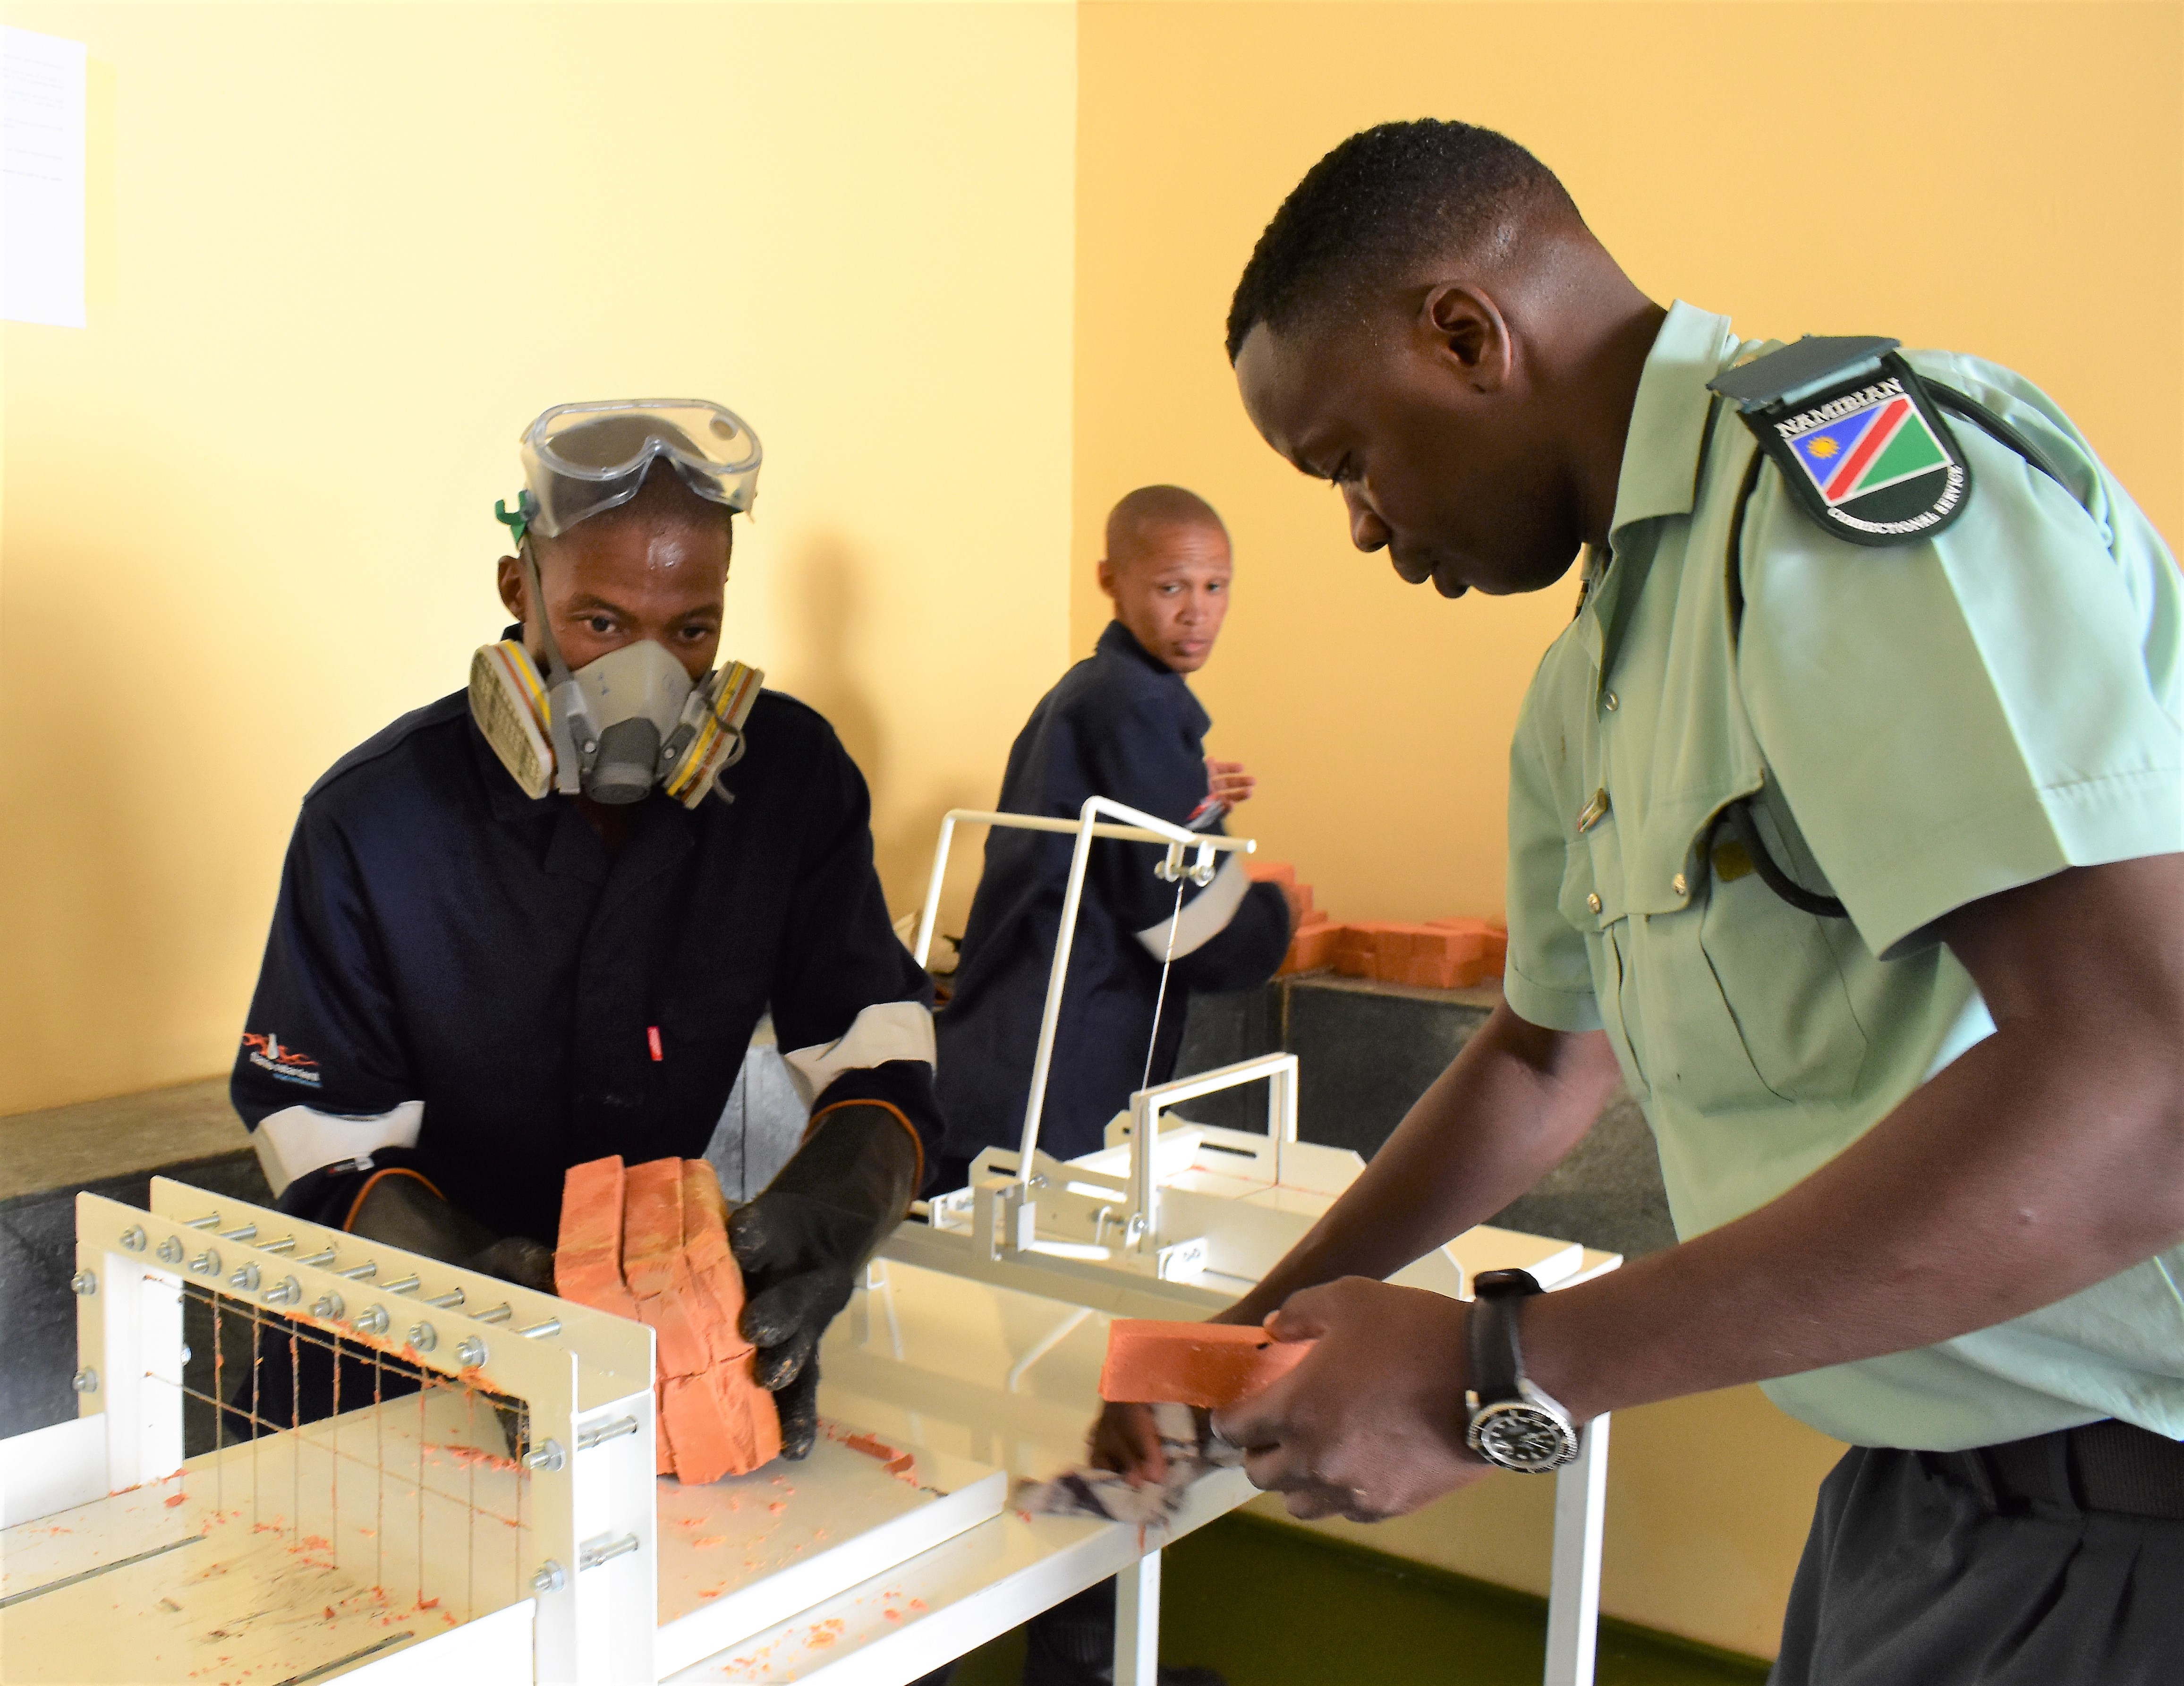 Serving society and the environment, UNODC launches hydroponics and soap production prisoner rehabilitation projects in Namibia